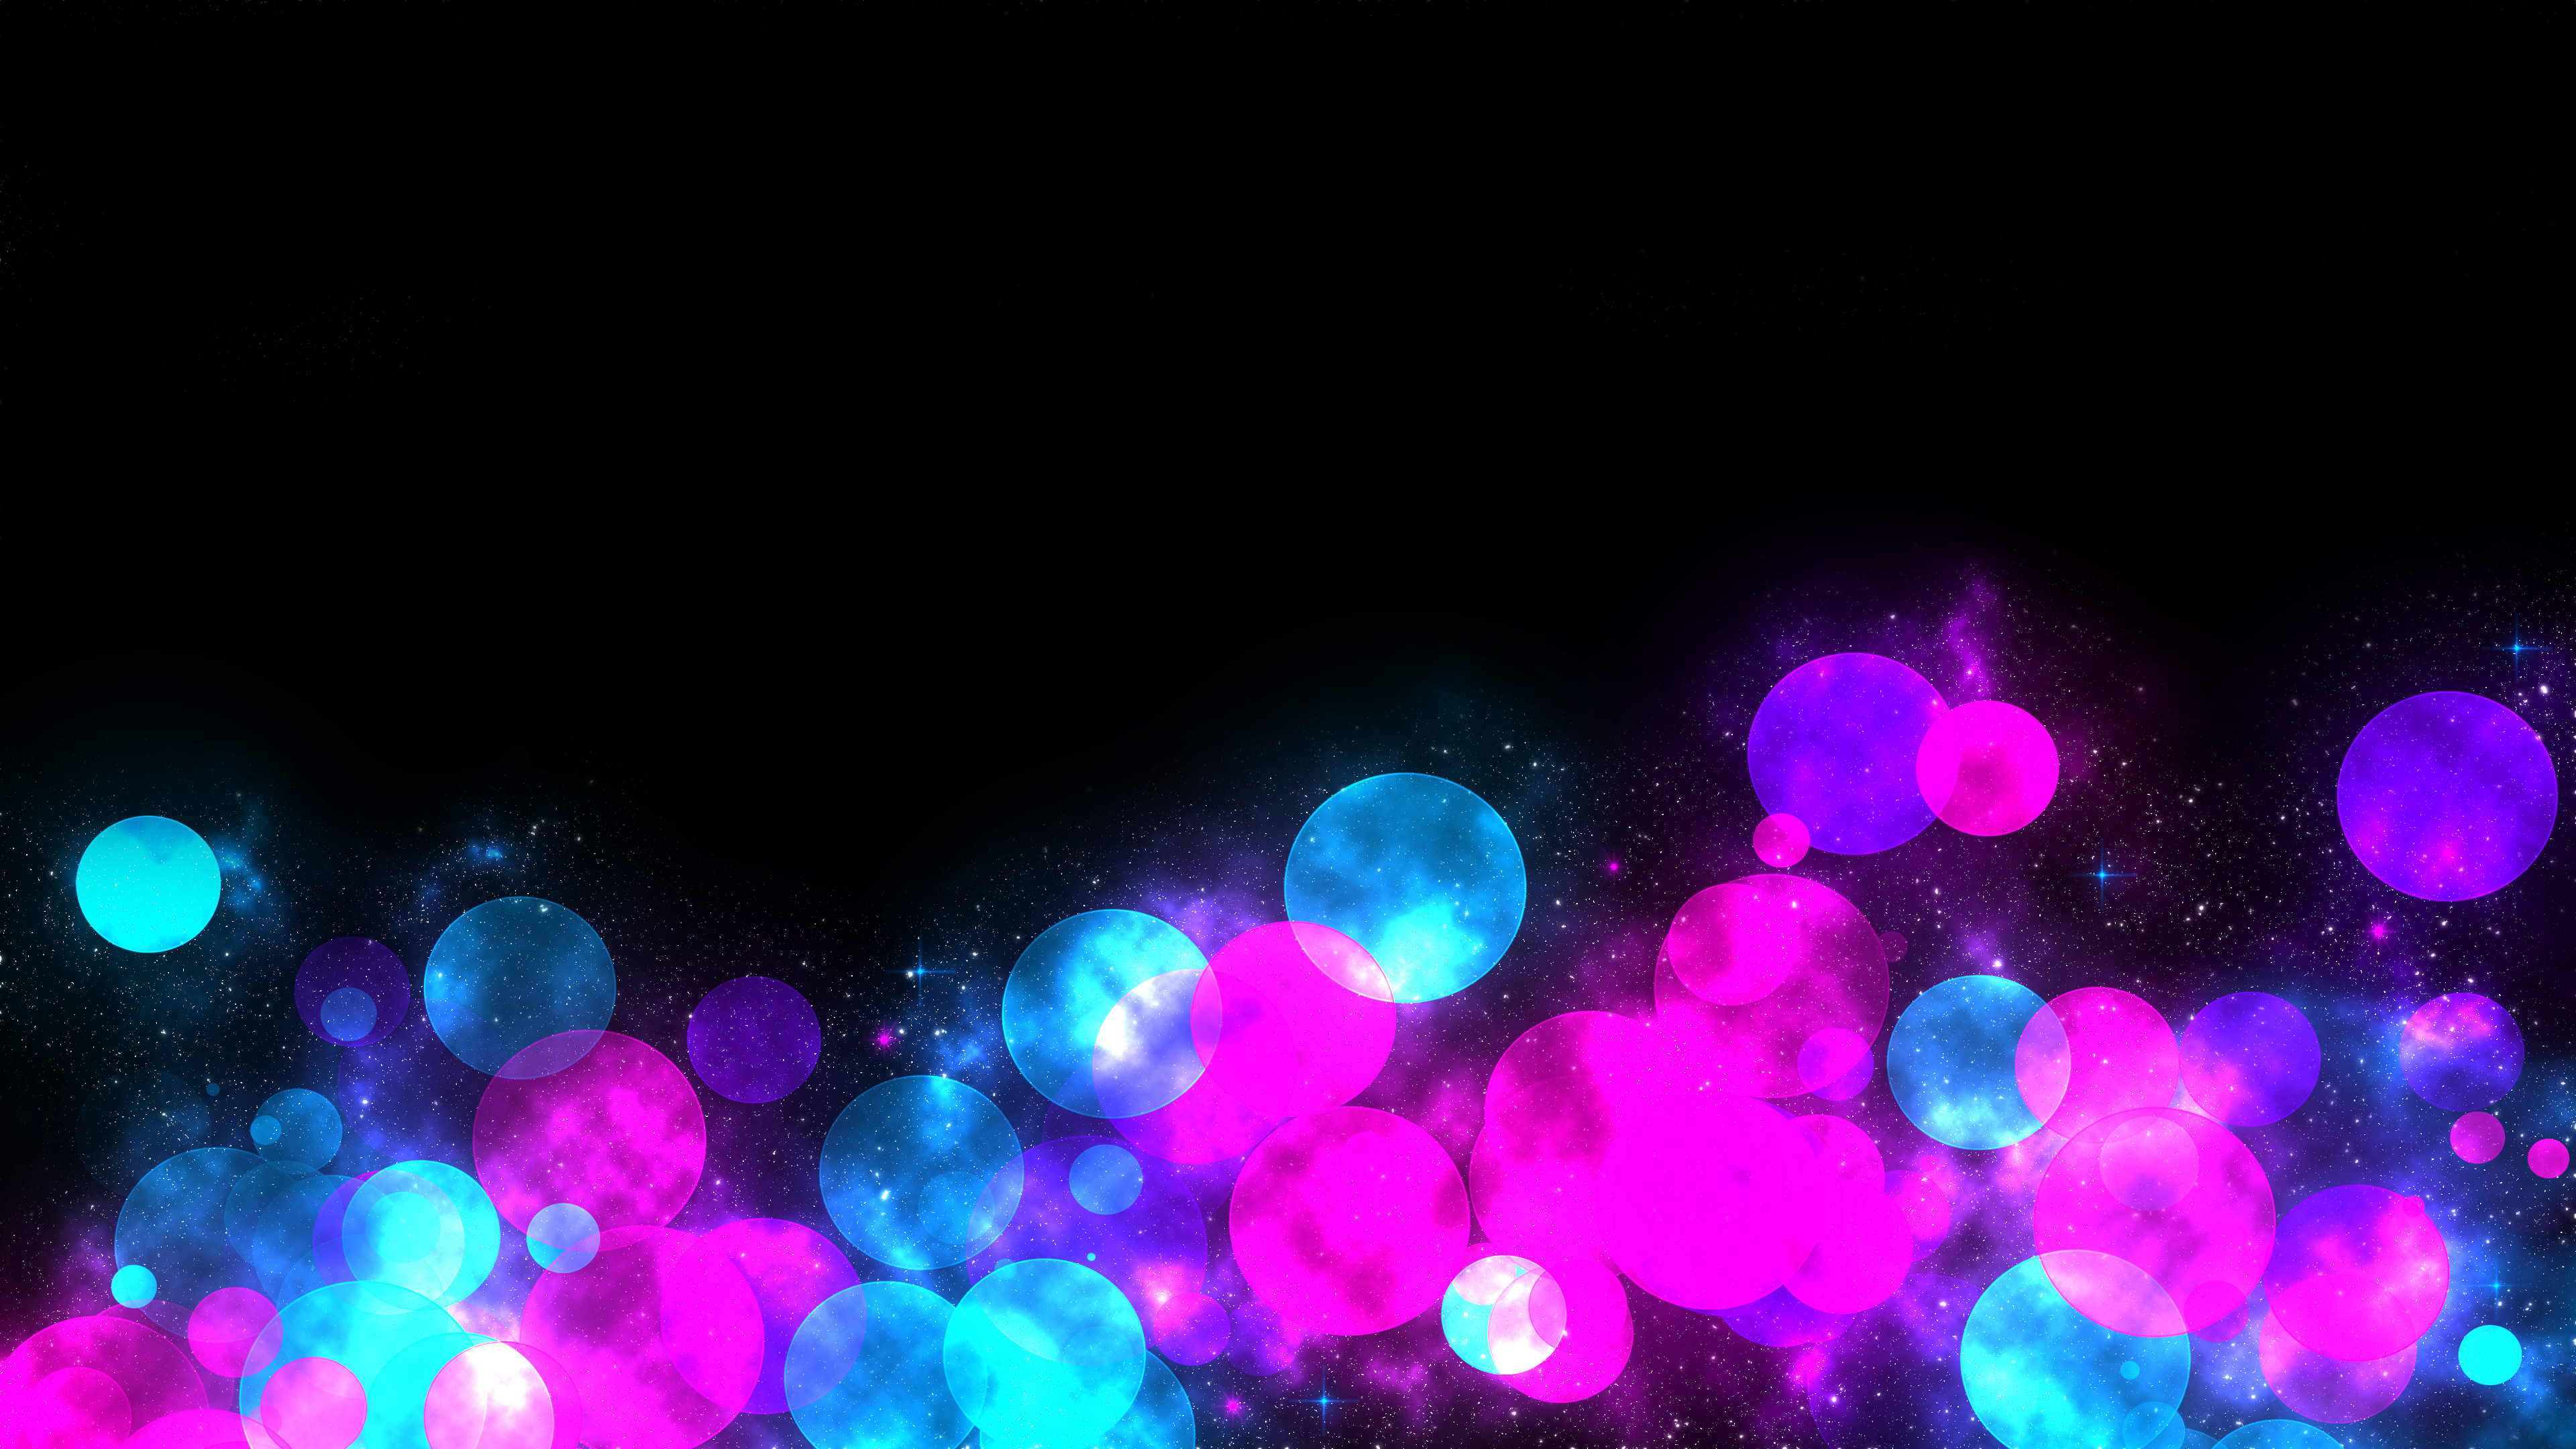 3840x2160 Pink and blue balloons on a black background wallpapers and images -  wallpapers, pictures, photos